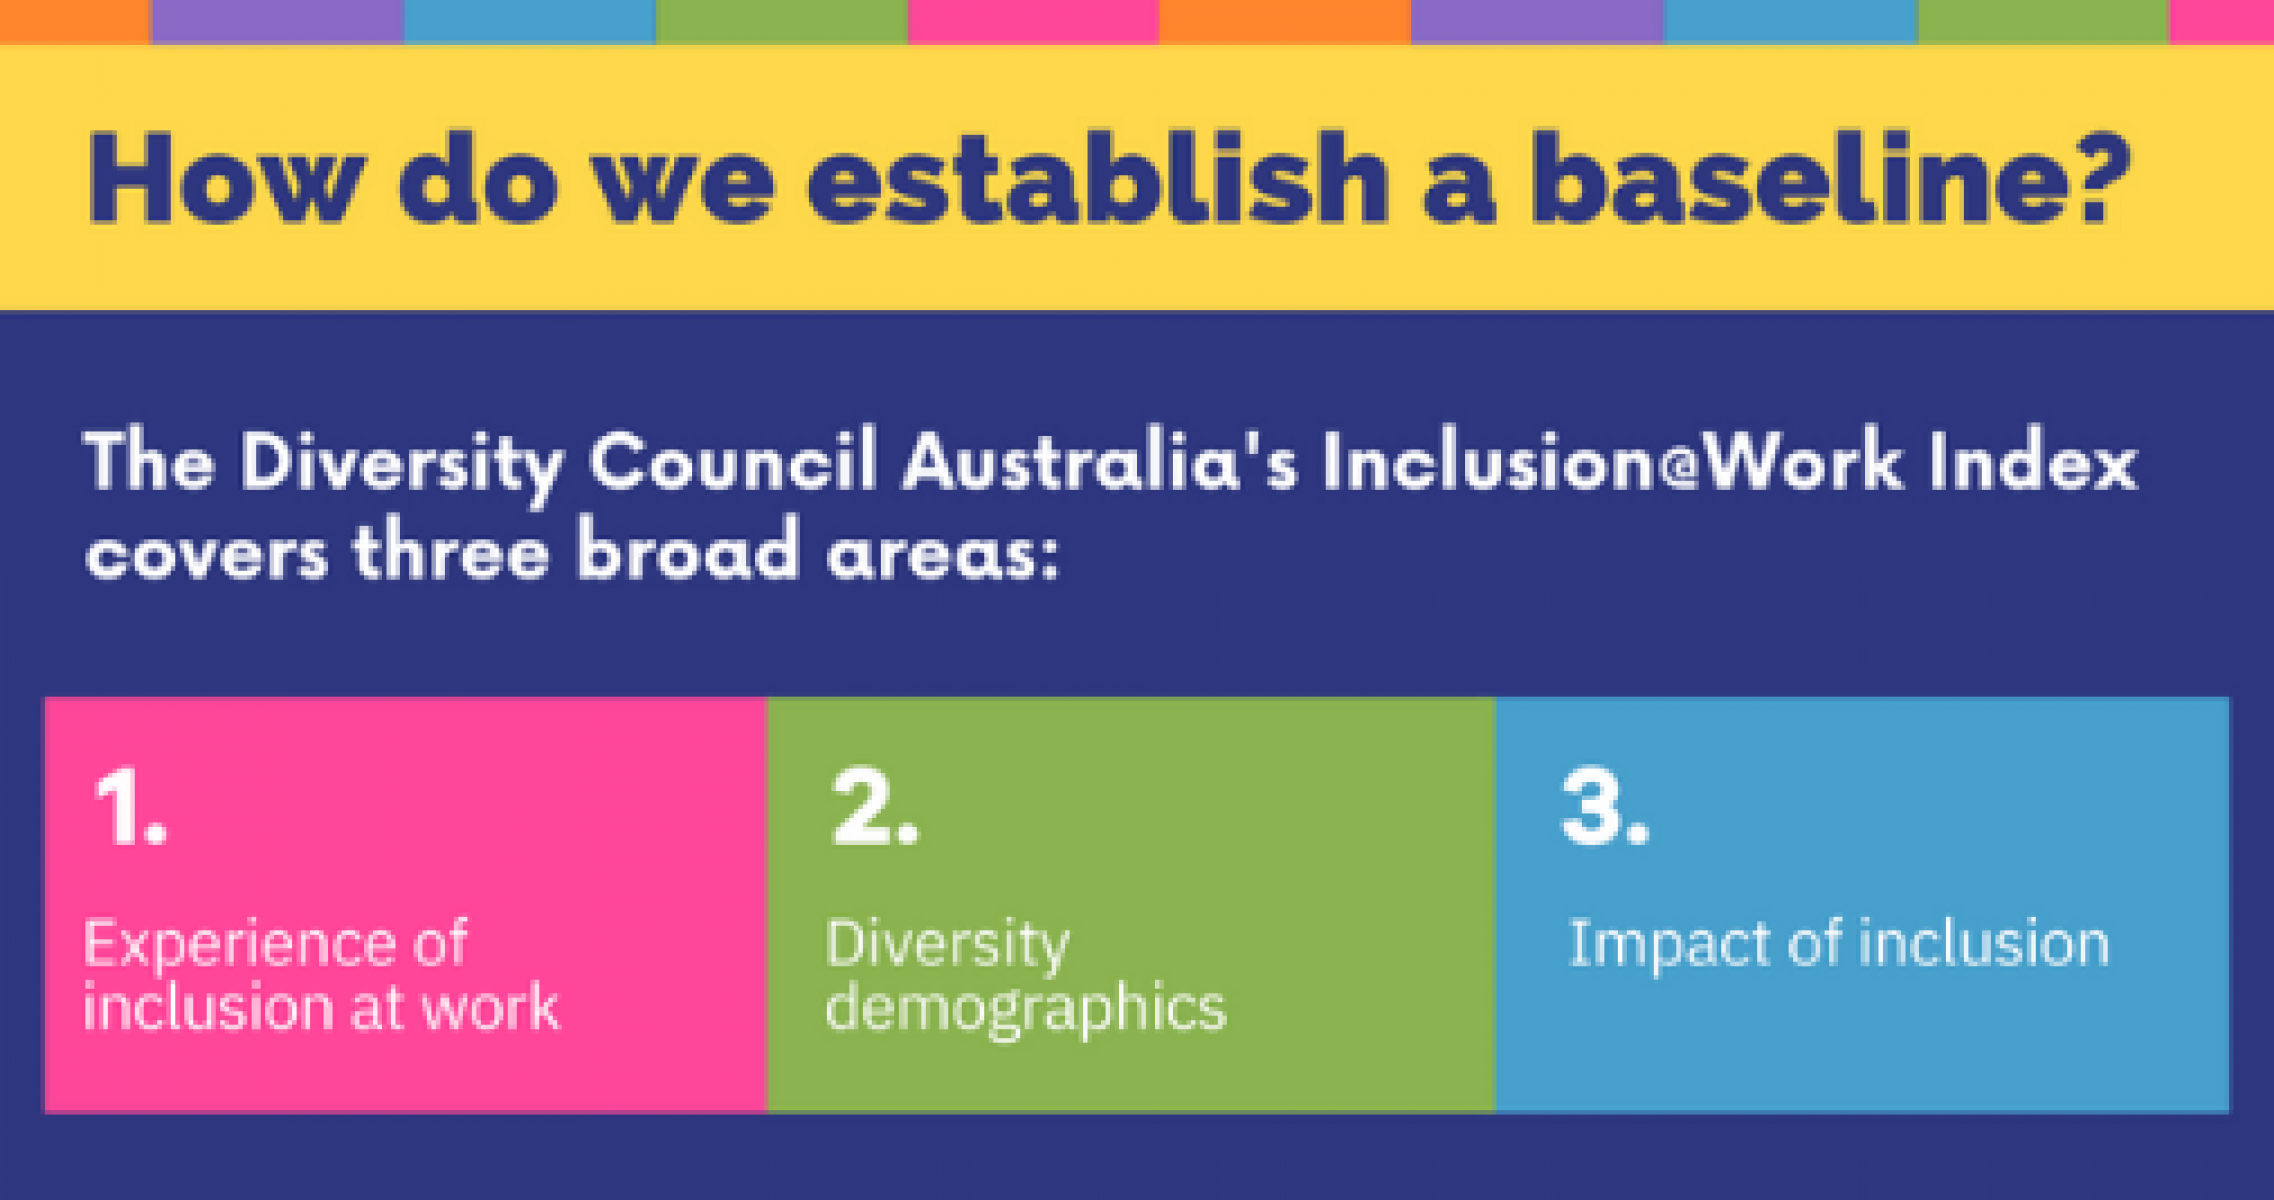 The Inclusion@Work Index covers three broad areas: experience of inclusion at work; diversity demographics and impact of inclusion.